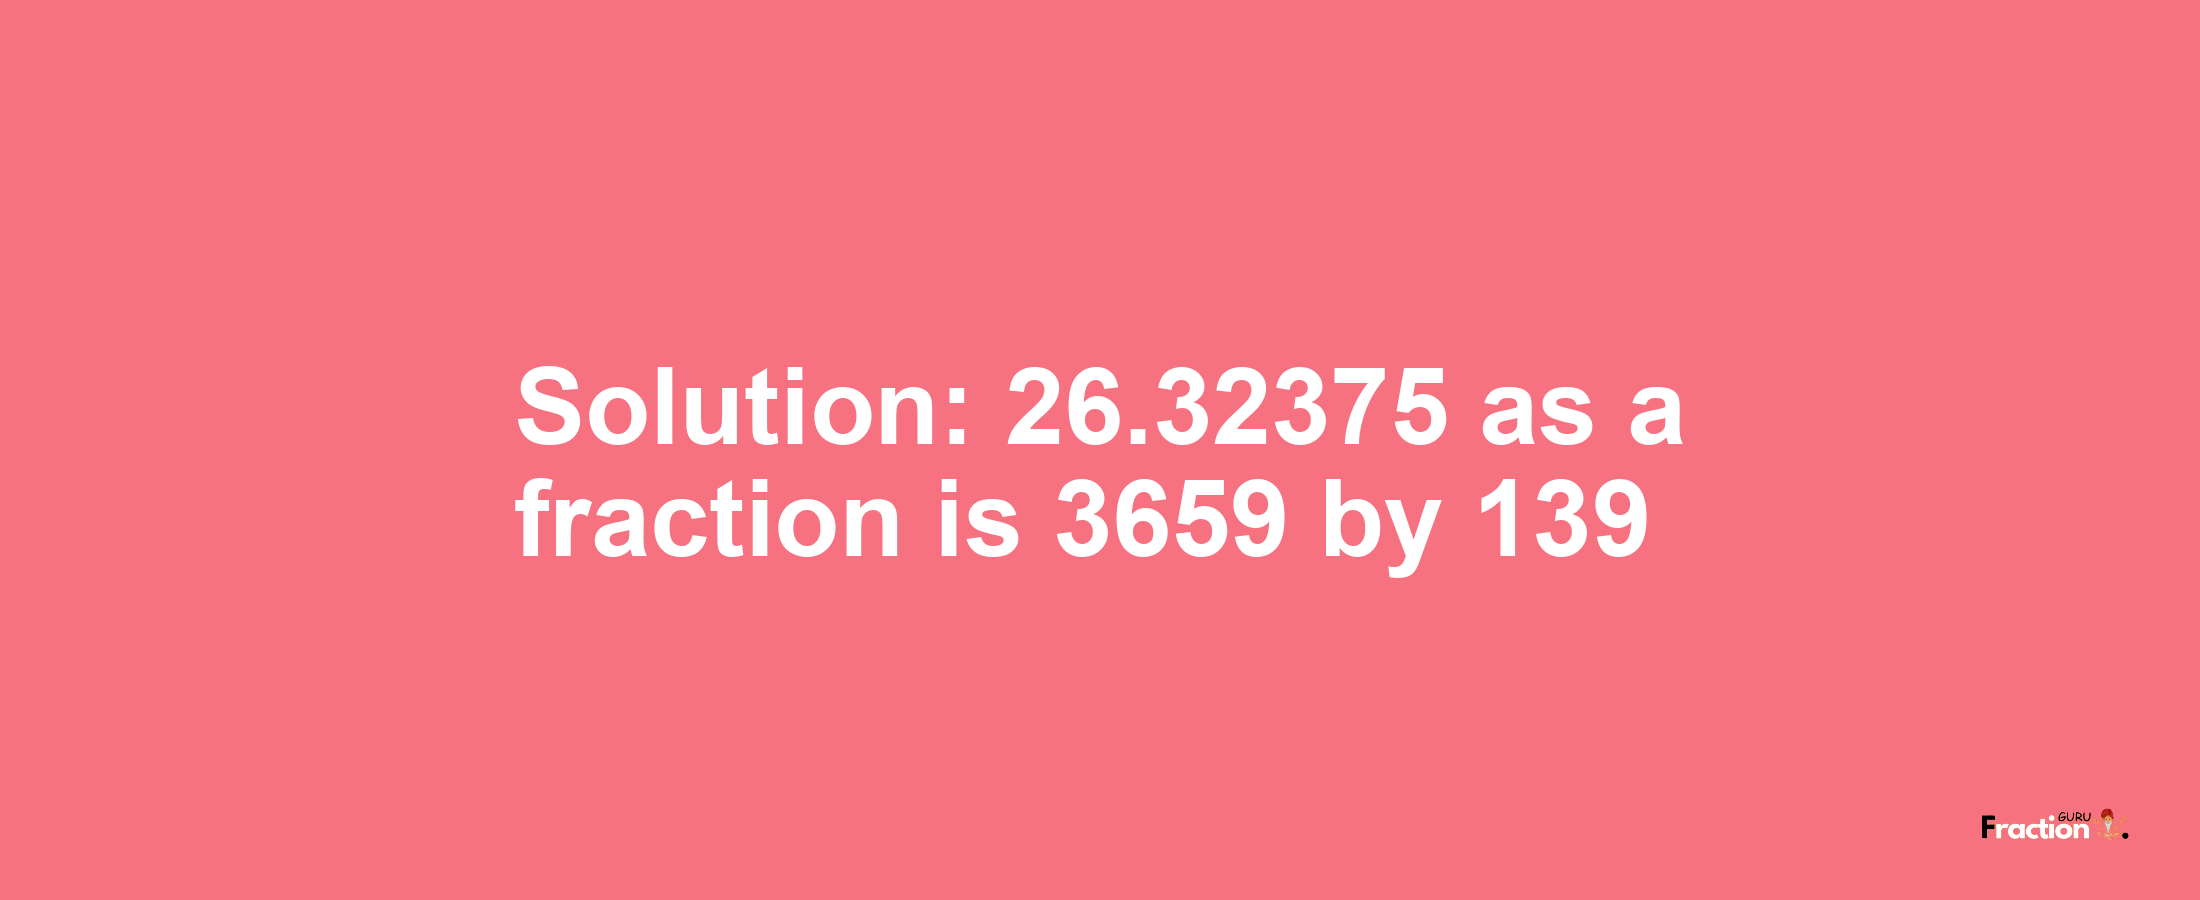 Solution:26.32375 as a fraction is 3659/139